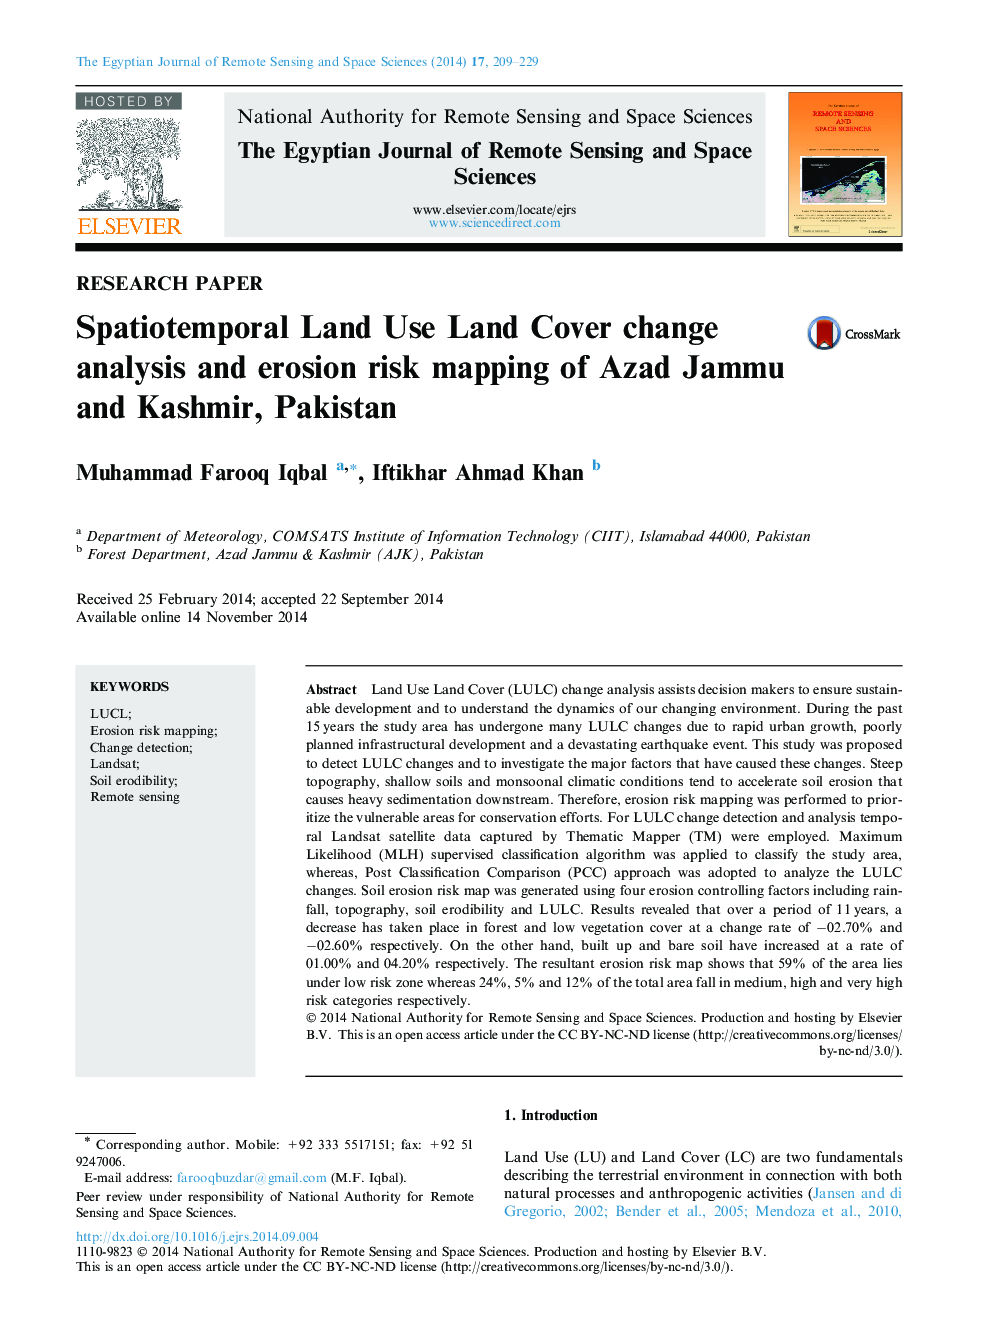 Spatiotemporal Land Use Land Cover change analysis and erosion risk mapping of Azad Jammu and Kashmir, Pakistan 